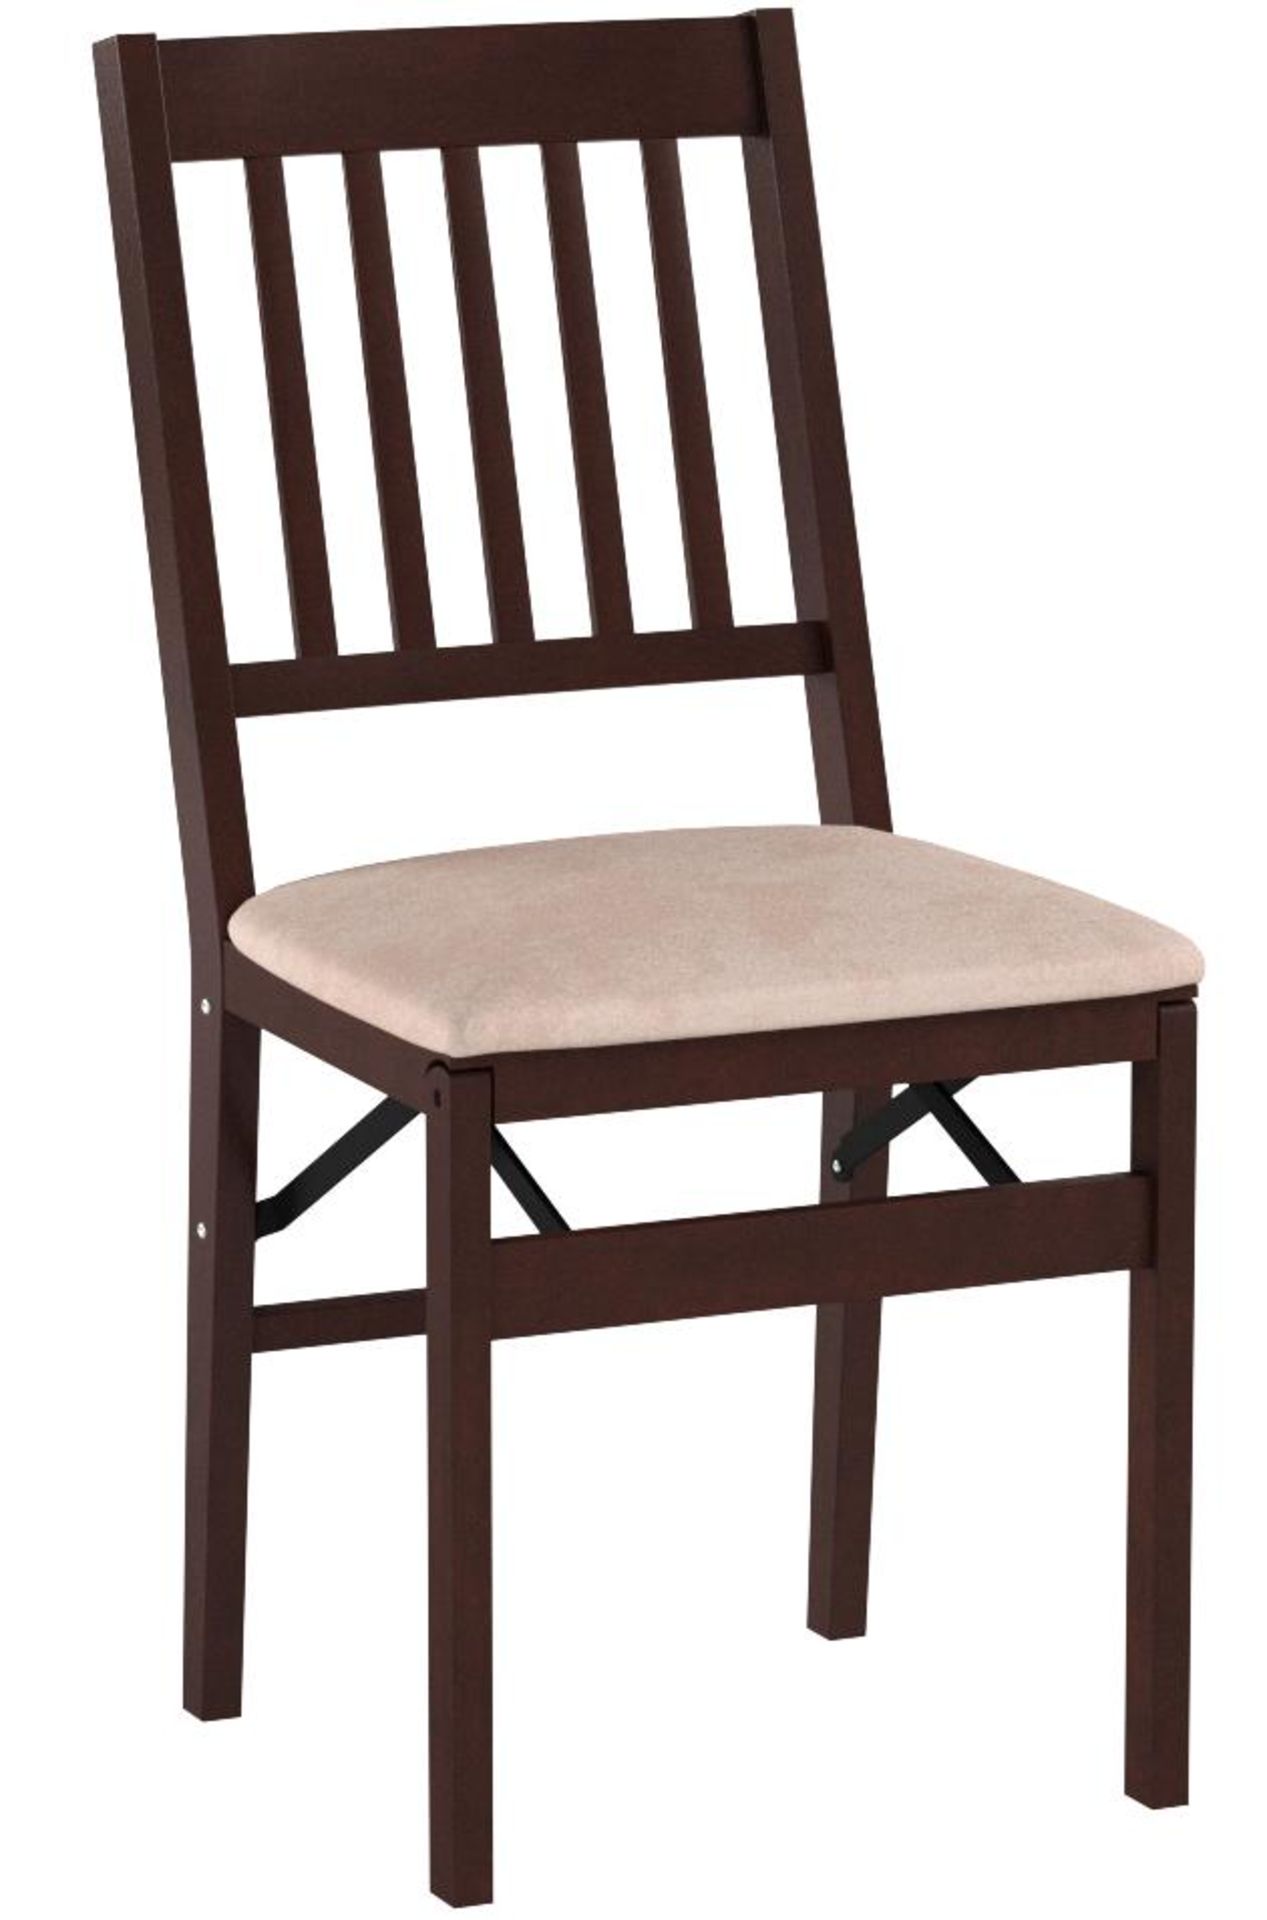 1 STAKMORE SOLID WOOD FOLDING CHAIR WITH PADDED SEAT RRP Â£39.99